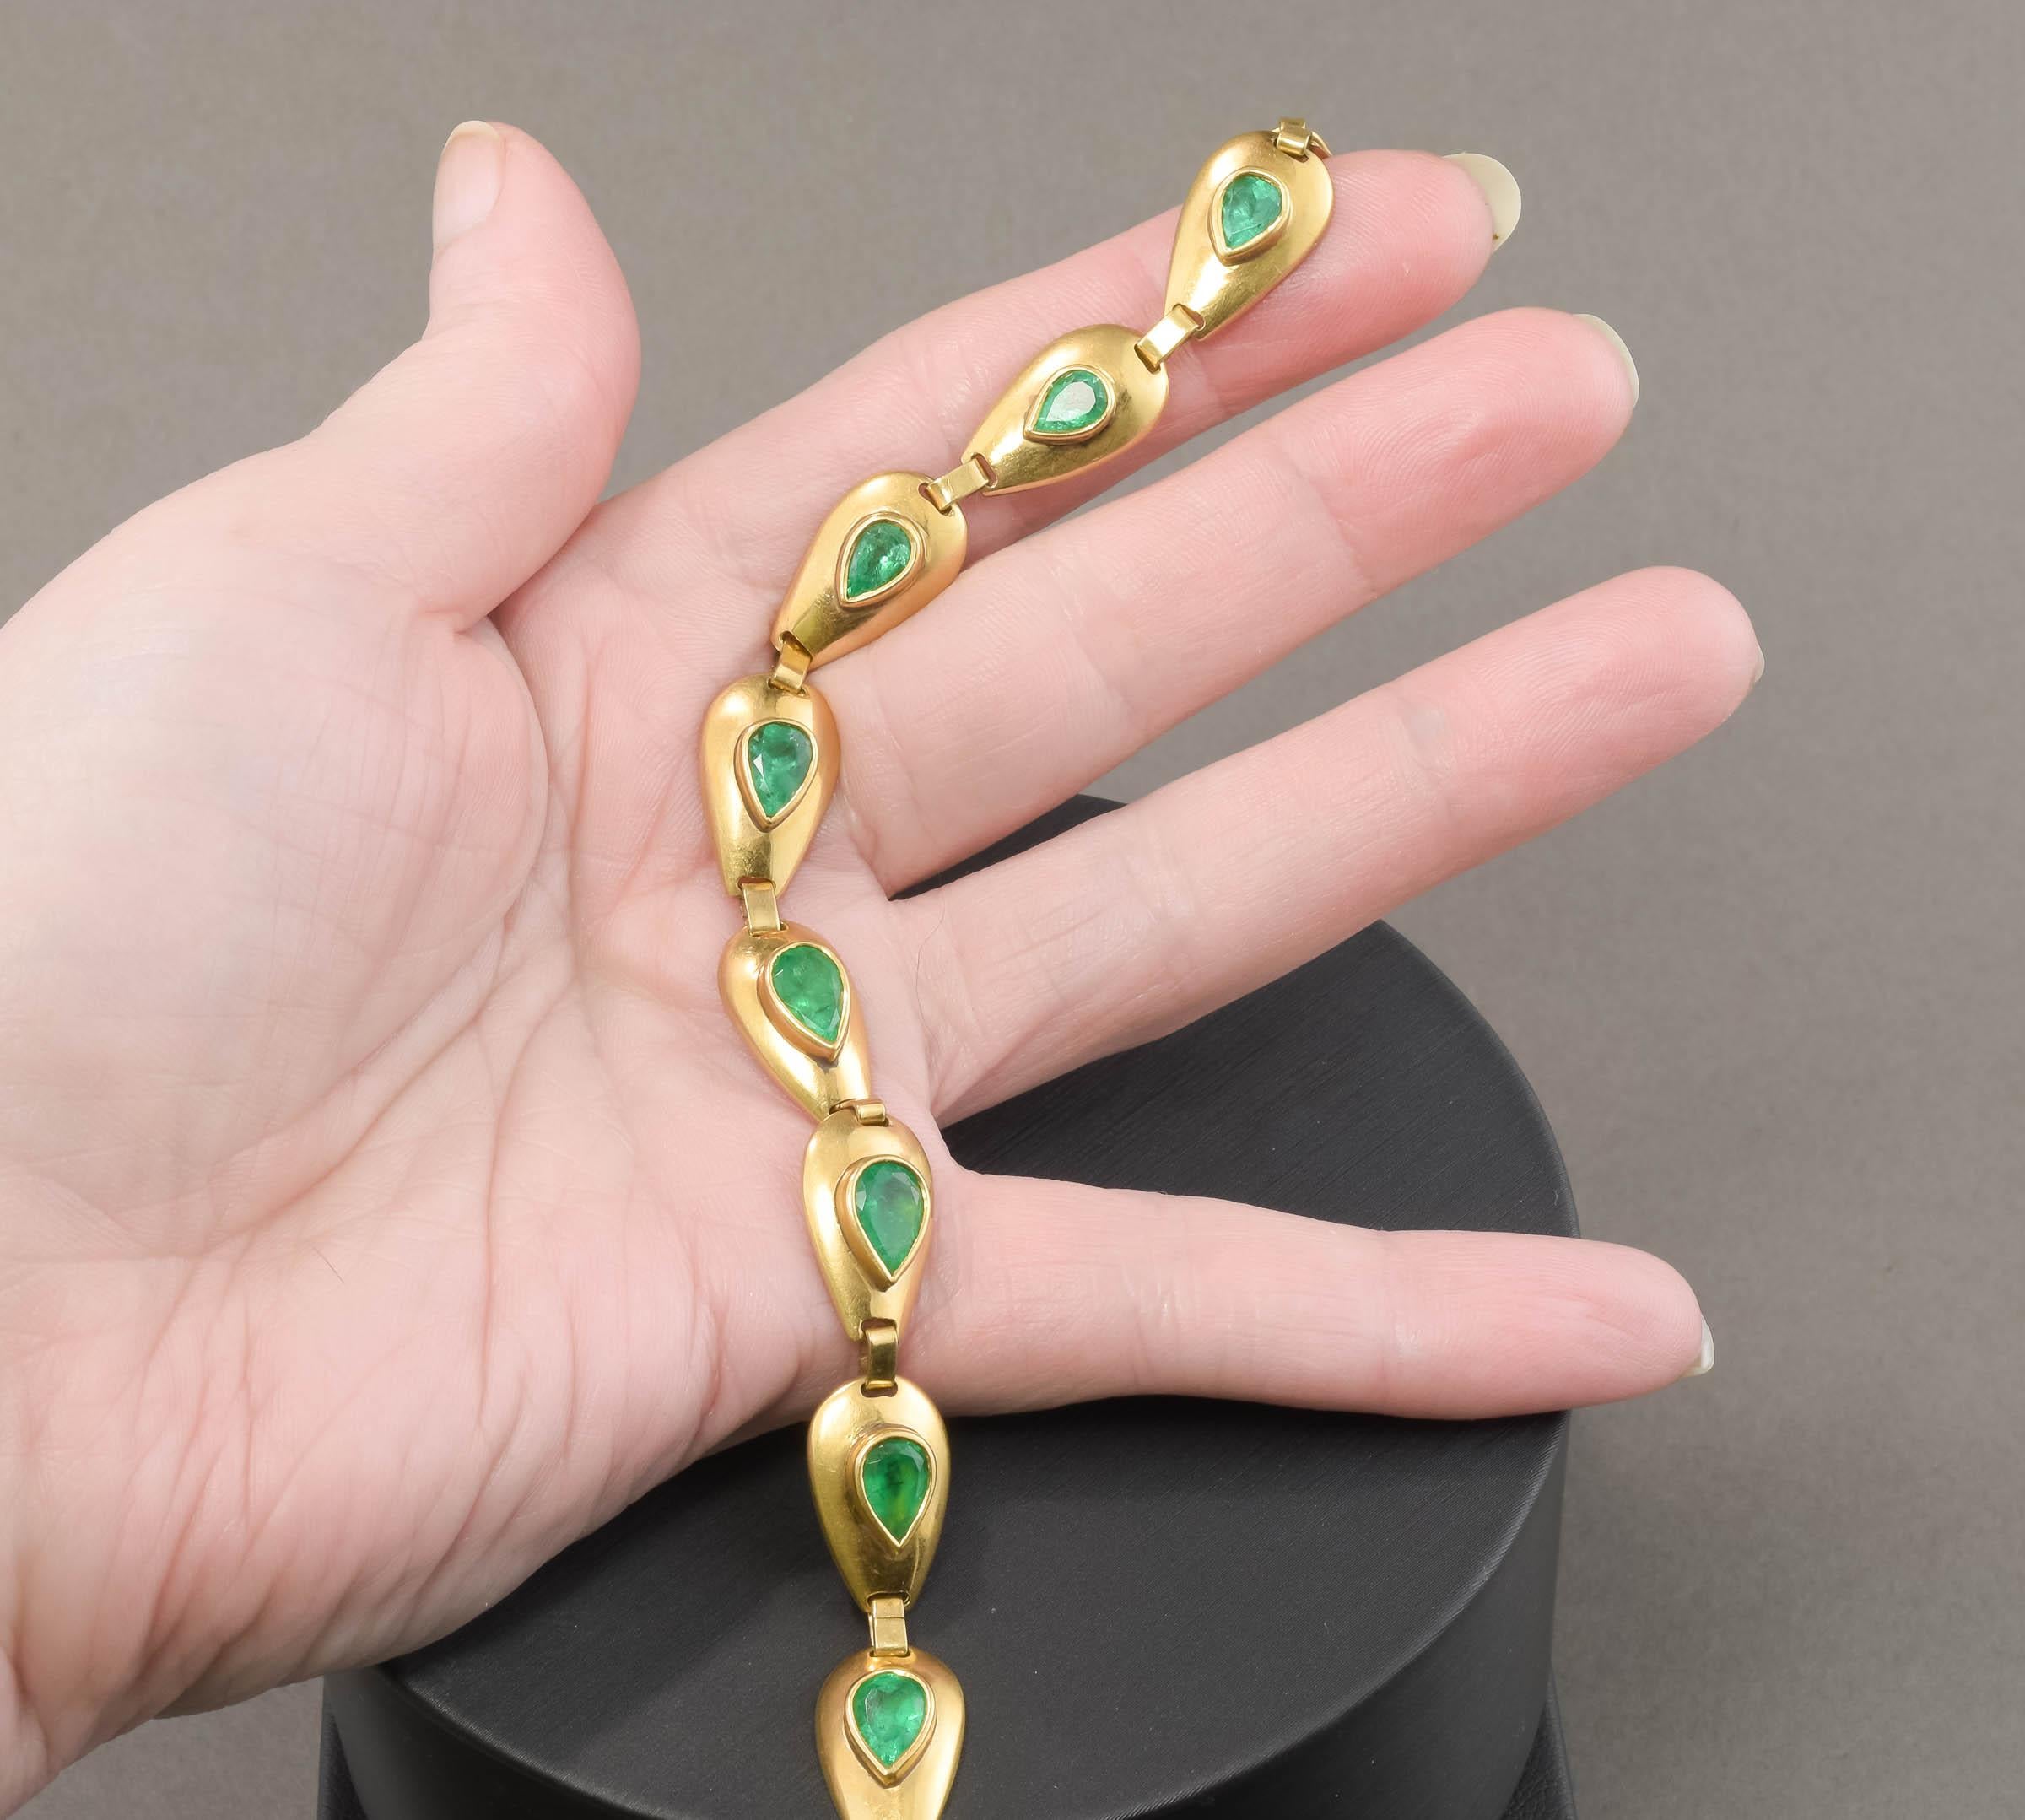 Offered is a very striking and unusual vintage Emerald Bracelet composed of ten 18K gold teardrop shaped links, each bezel-set with a vividly colored natural emerald.  The bracelet retains both its original hallmarked slide in clasp and safety